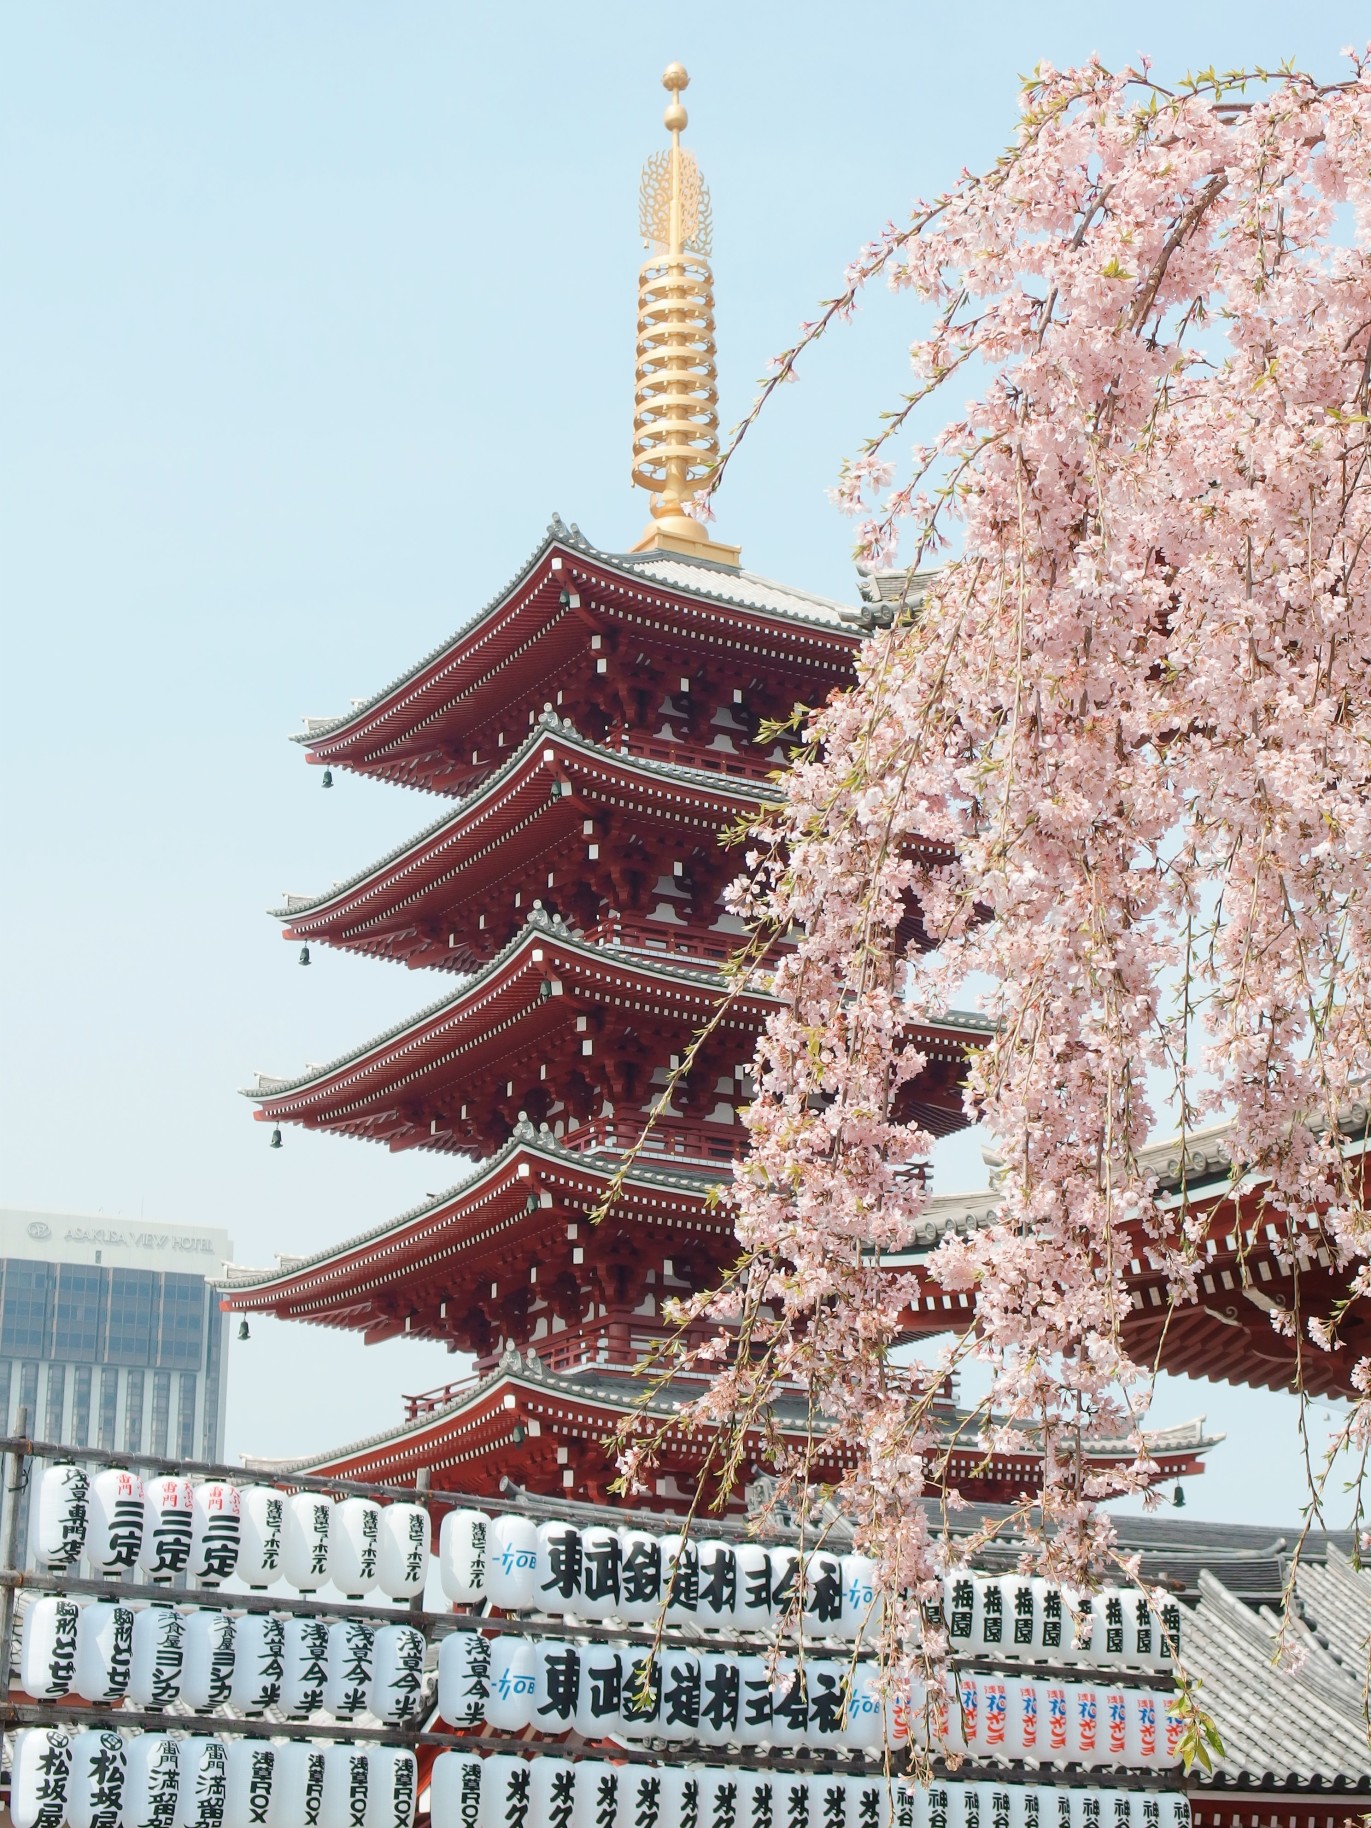 temple next to tree with pink flowers during daytime